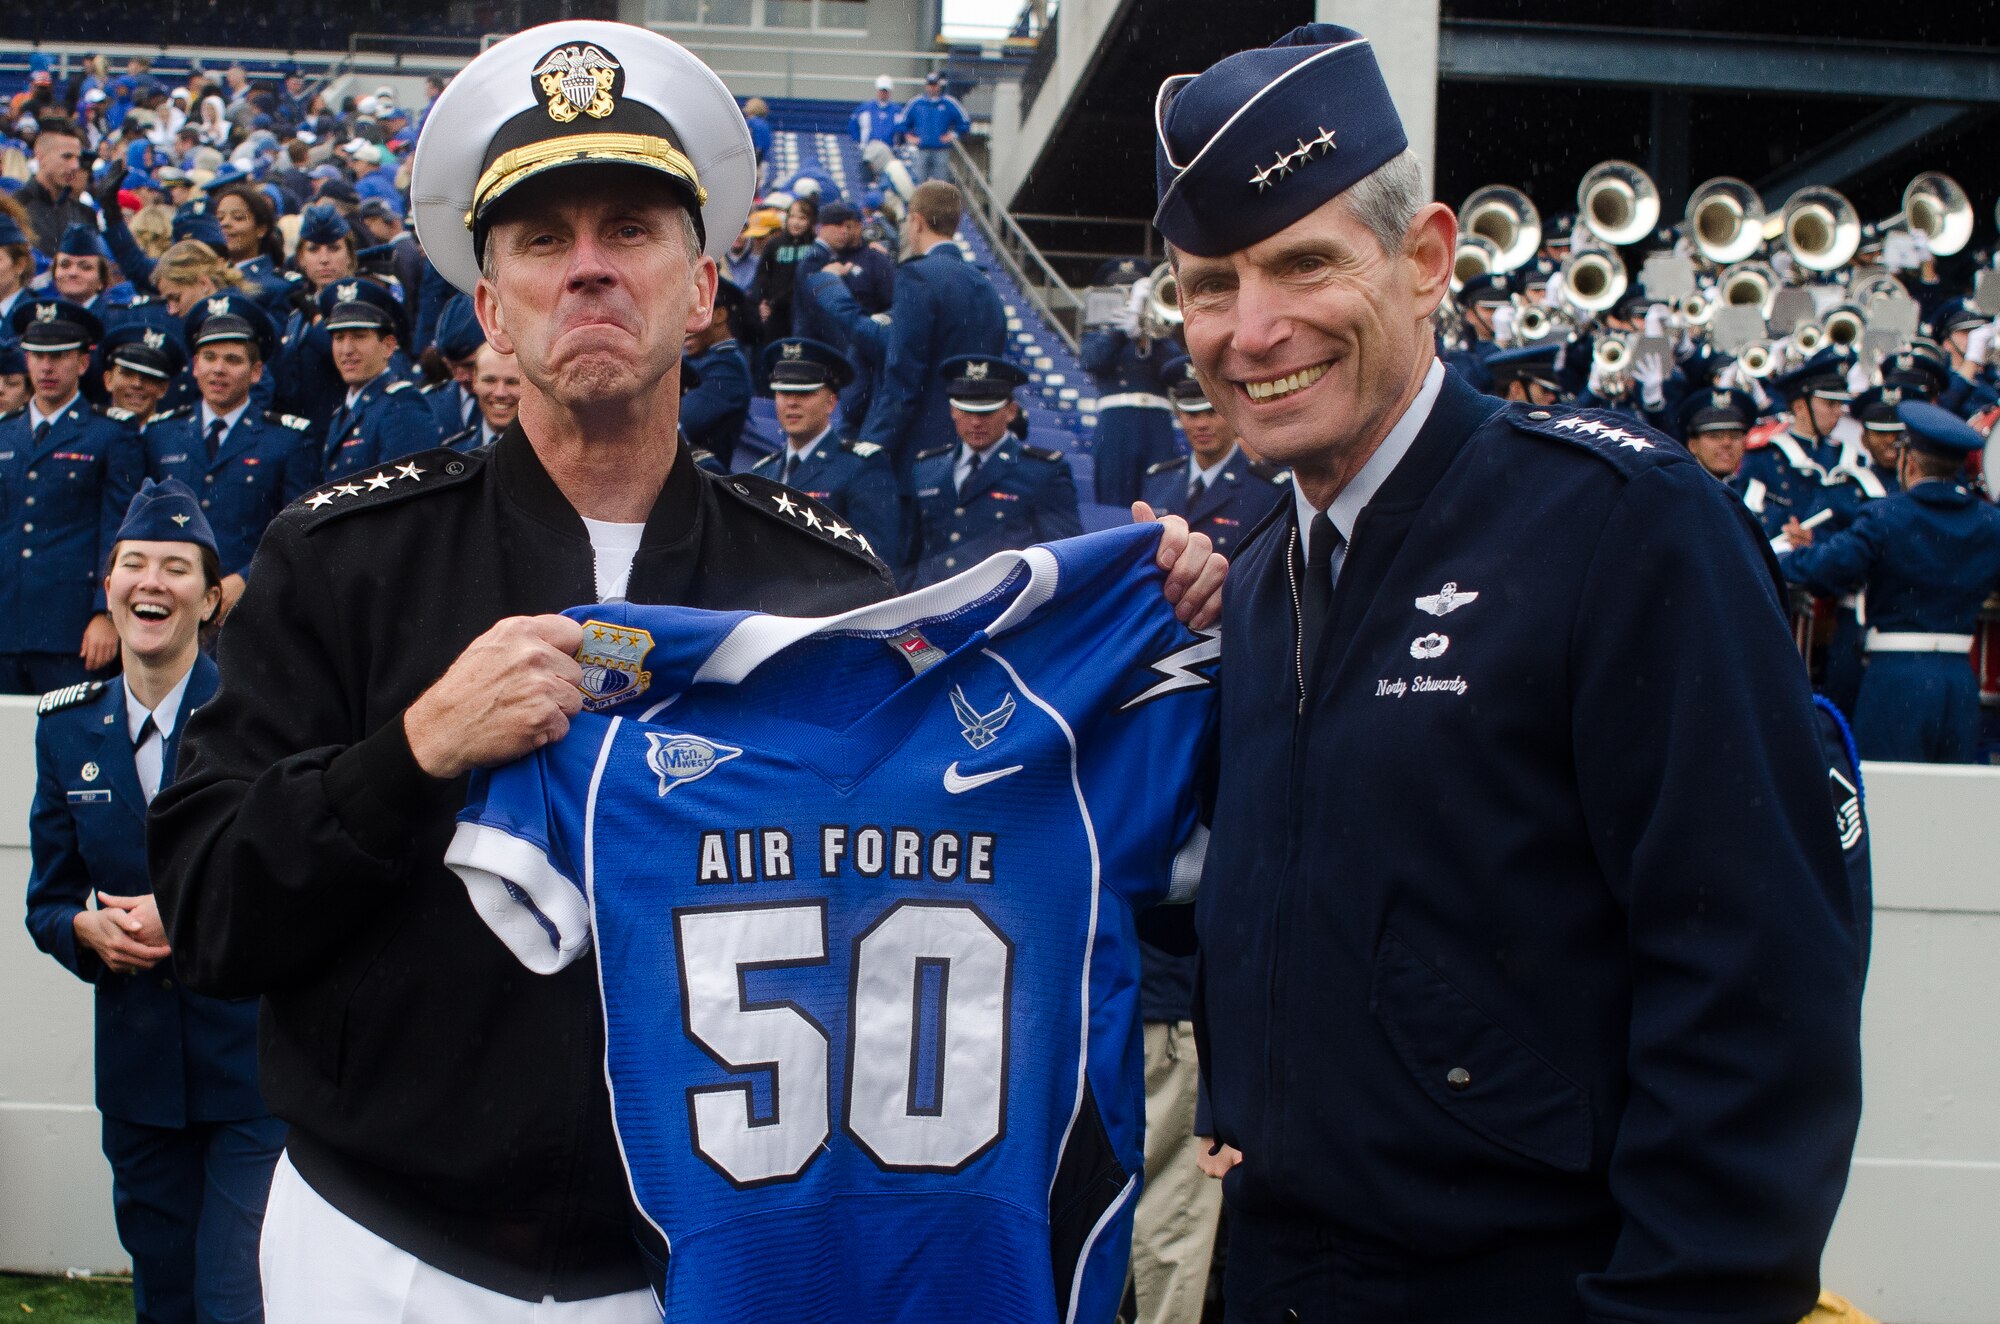 Air Force Chief of Staff Gen. Norton Schwartz has the Chief of Naval Operations Adm. Jonathan Greenert pose with a Falcons jersey to after the Falcons beat the Midshipmen of Navy Saturday, Oct. 1, 2011 at the Naval Academy's Jack Stephens Field. The Falcons dominated the first half, but almost let go of the game in the second after the Mids outscored them 25-7. The Falcons won 35-34 in overtime after Falcon linebacker Alex Means' block of Mids kicker Jon Teague point-after attempt. (U.S. Air Force photo/Russ Scalf)